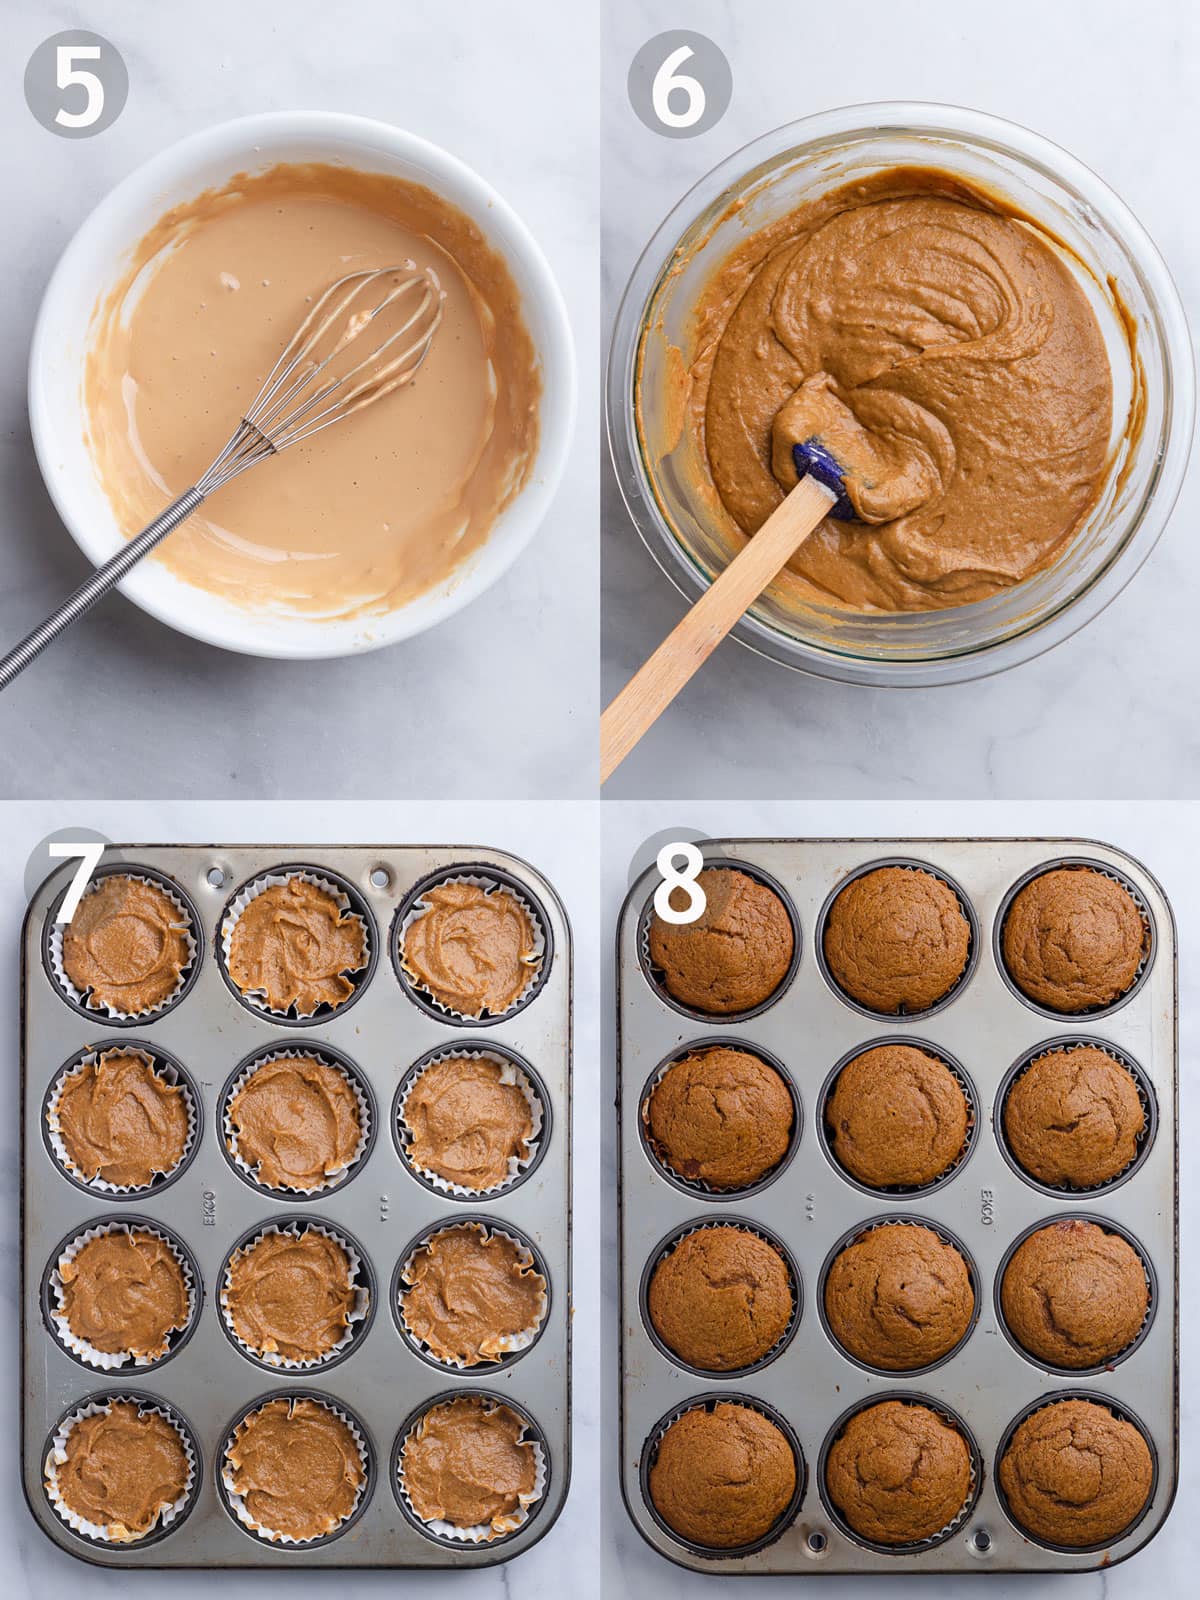 Last 4 steps of making muffins including dissolving the protein powder into a paste, combining the wet and dry ingredients and baking the muffins.